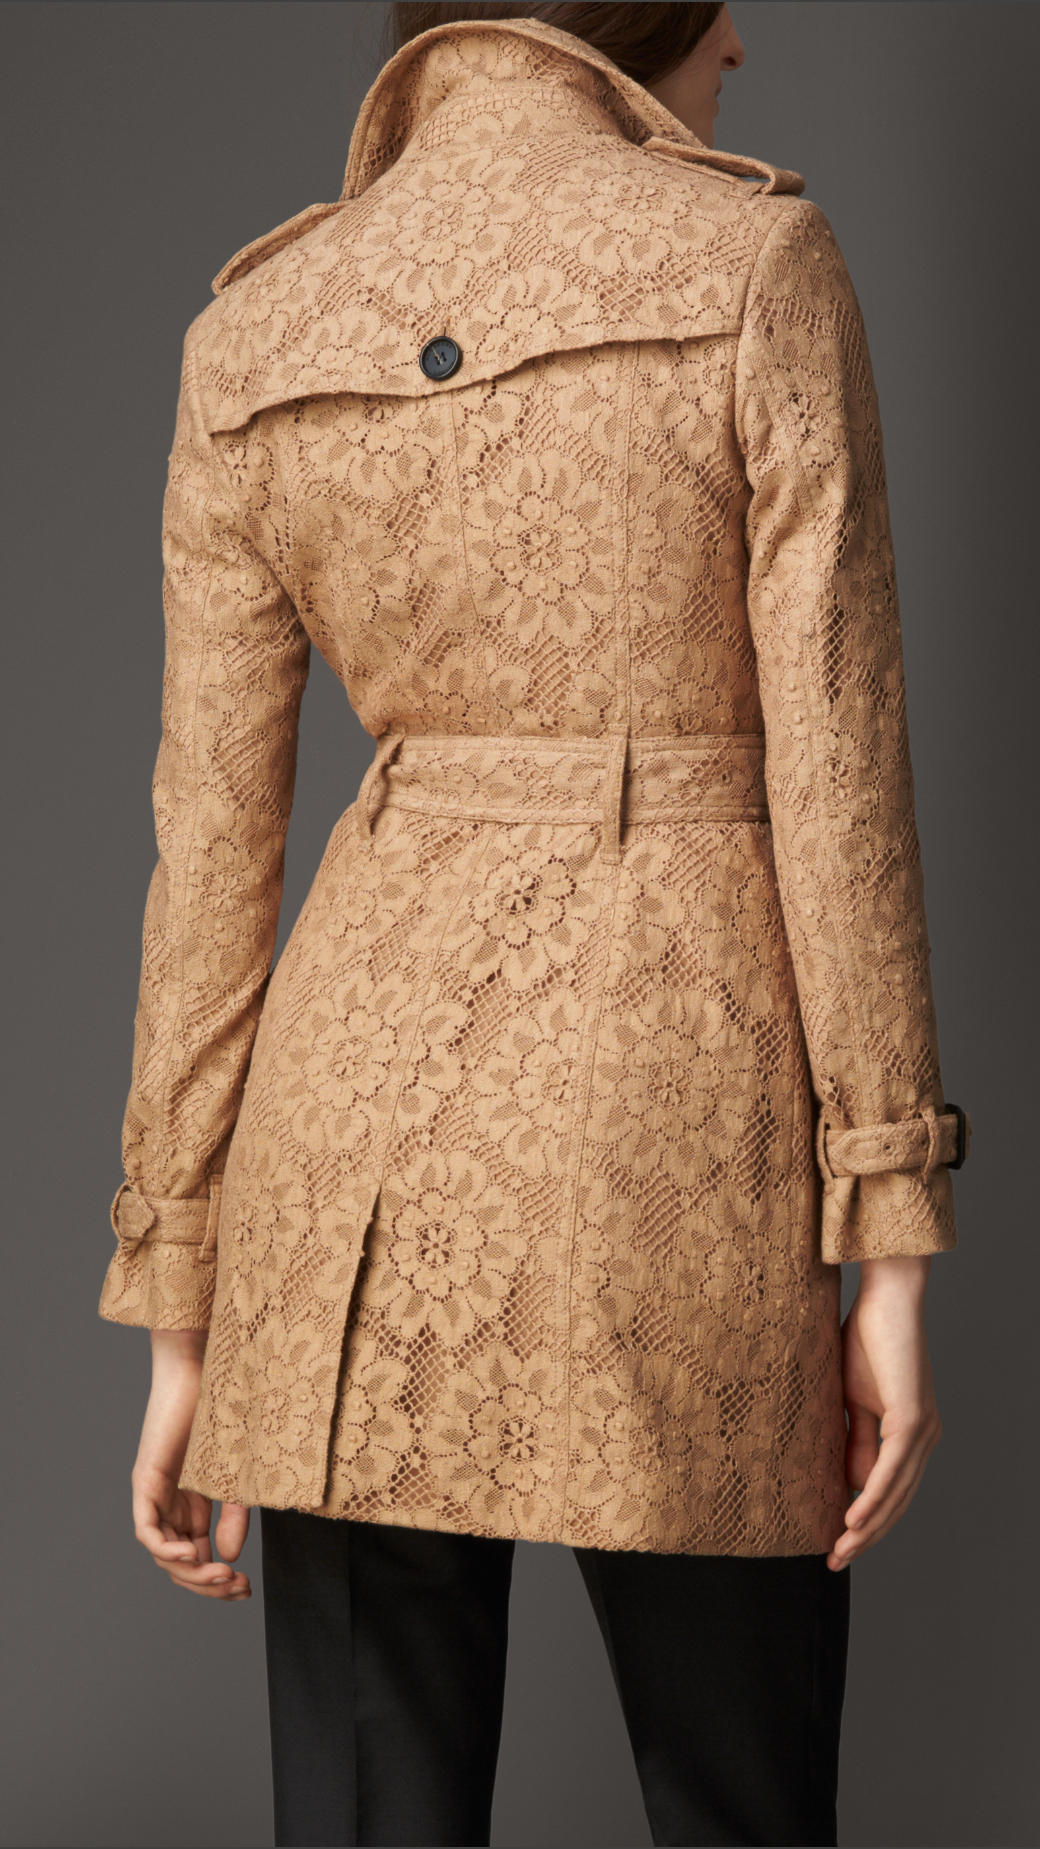 Lyst - Burberry English Floral Lace Trench Coat